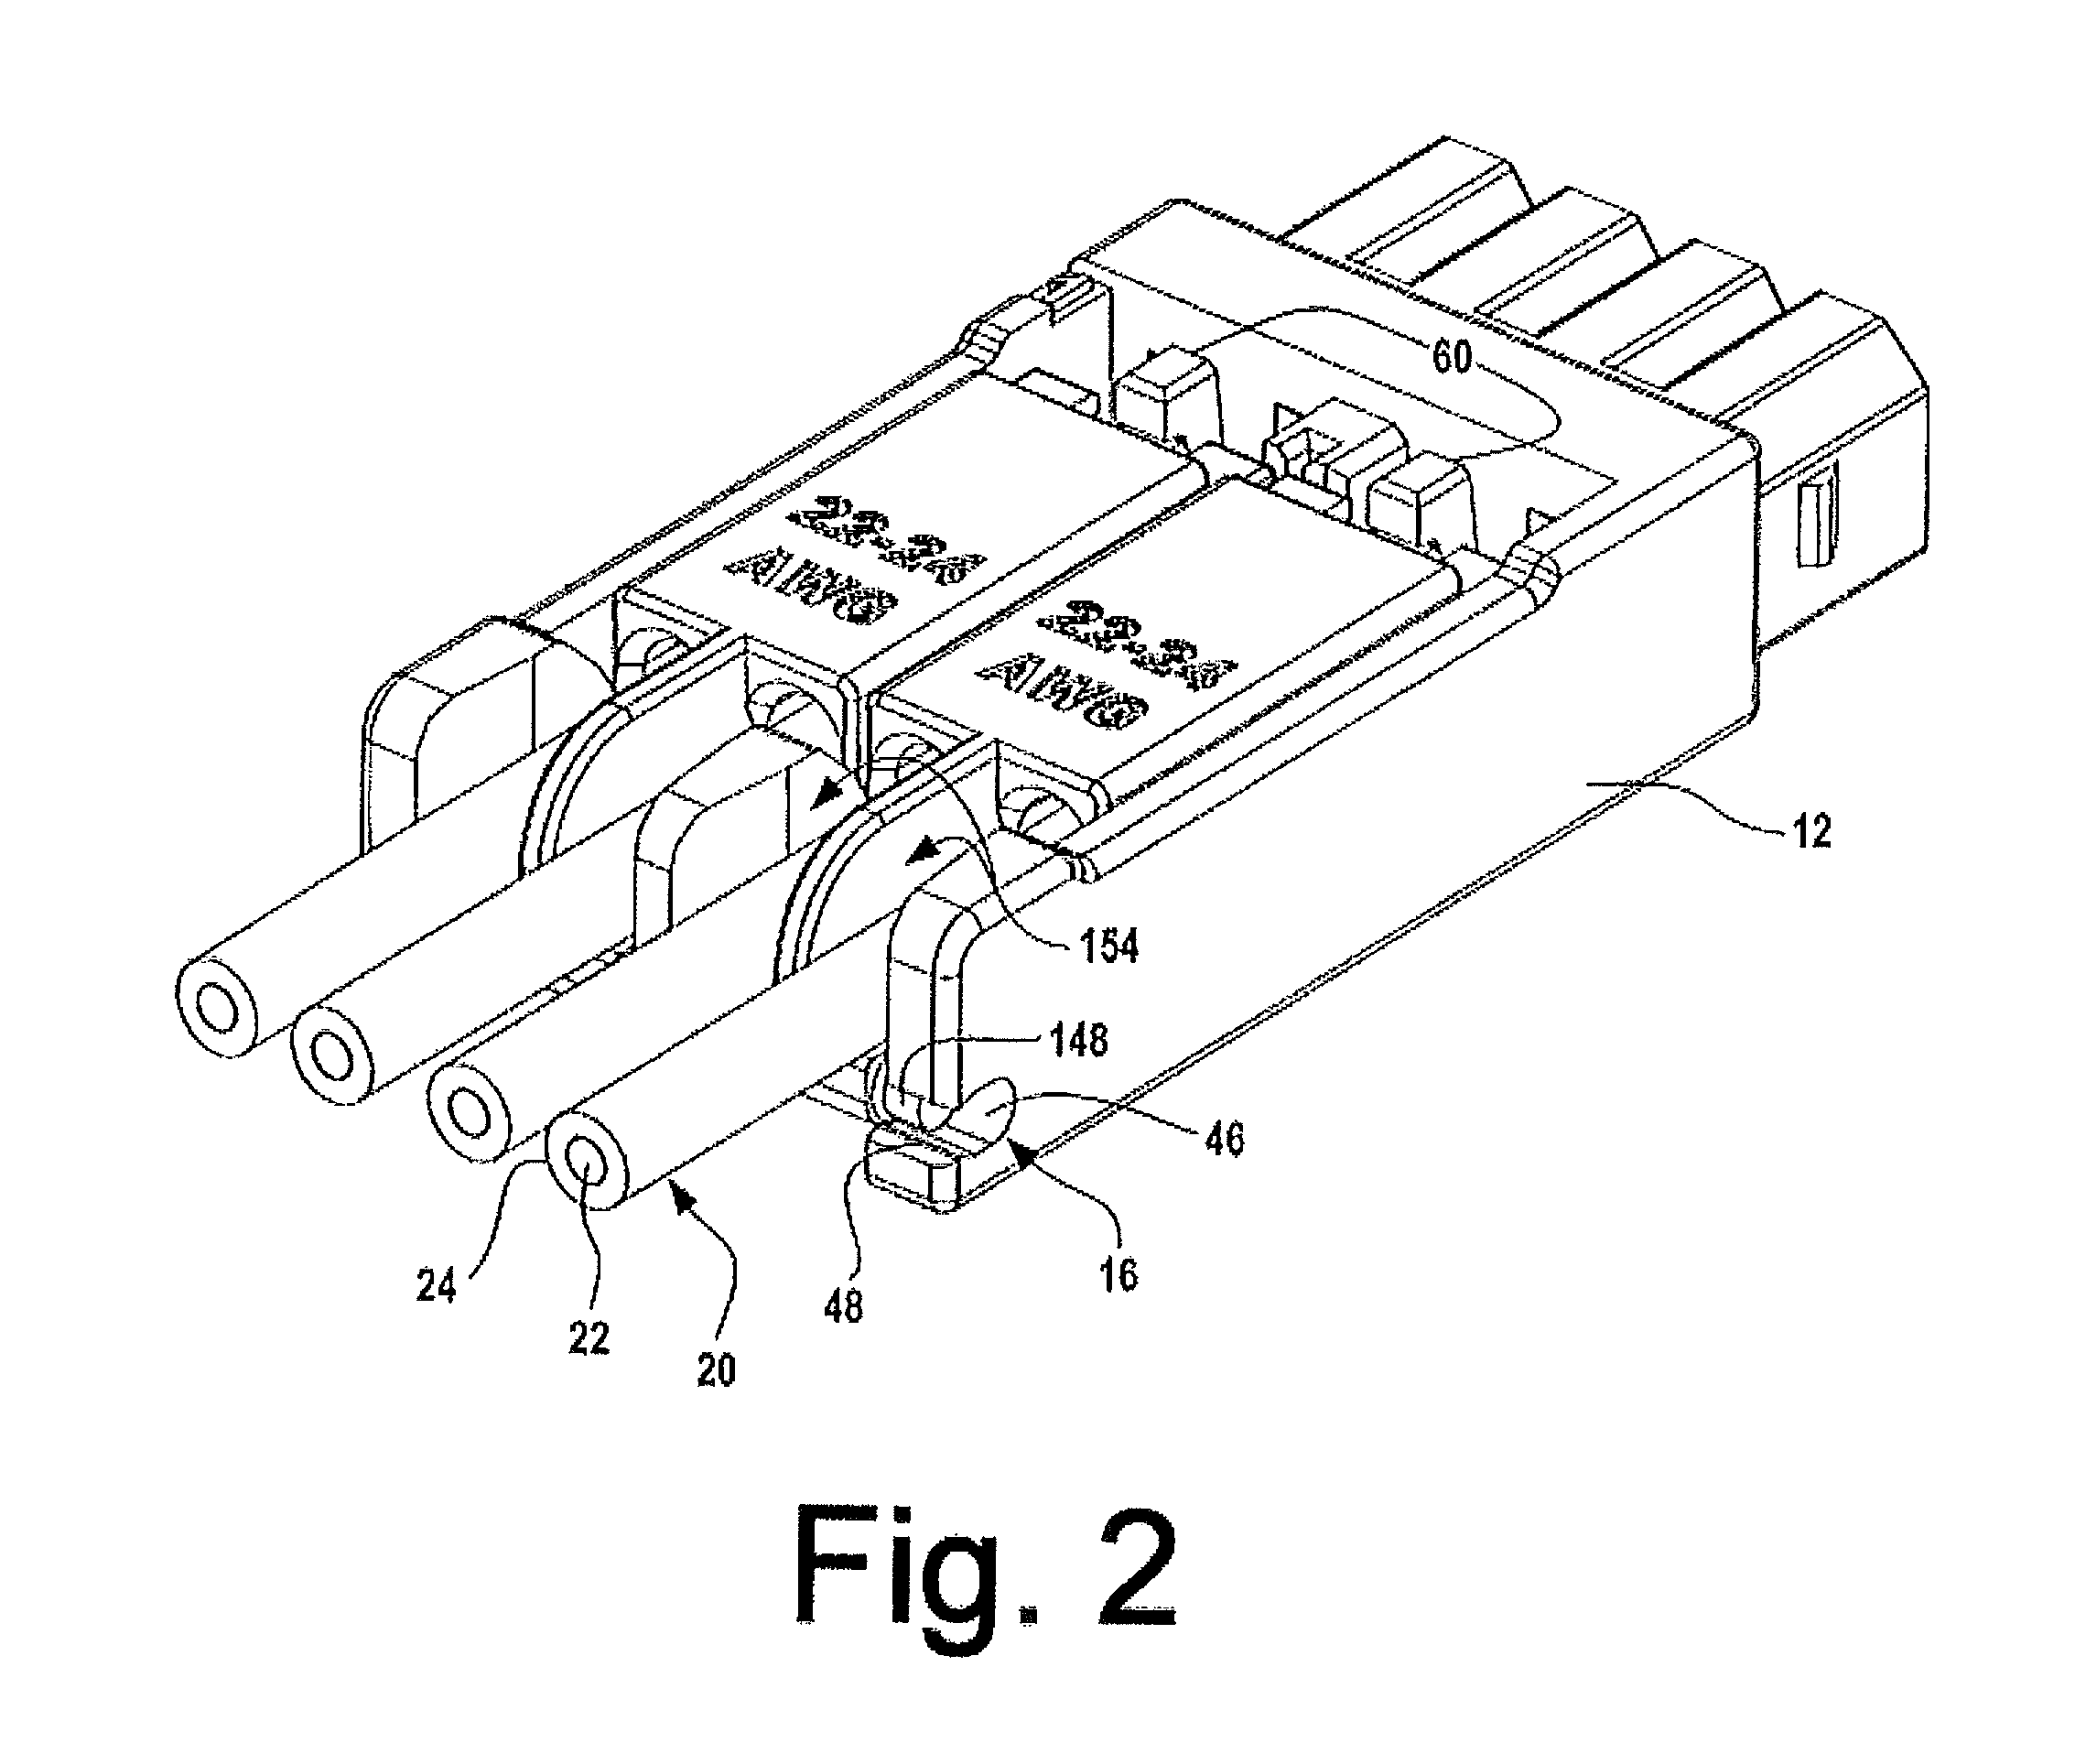 Electrical connector assembly and method